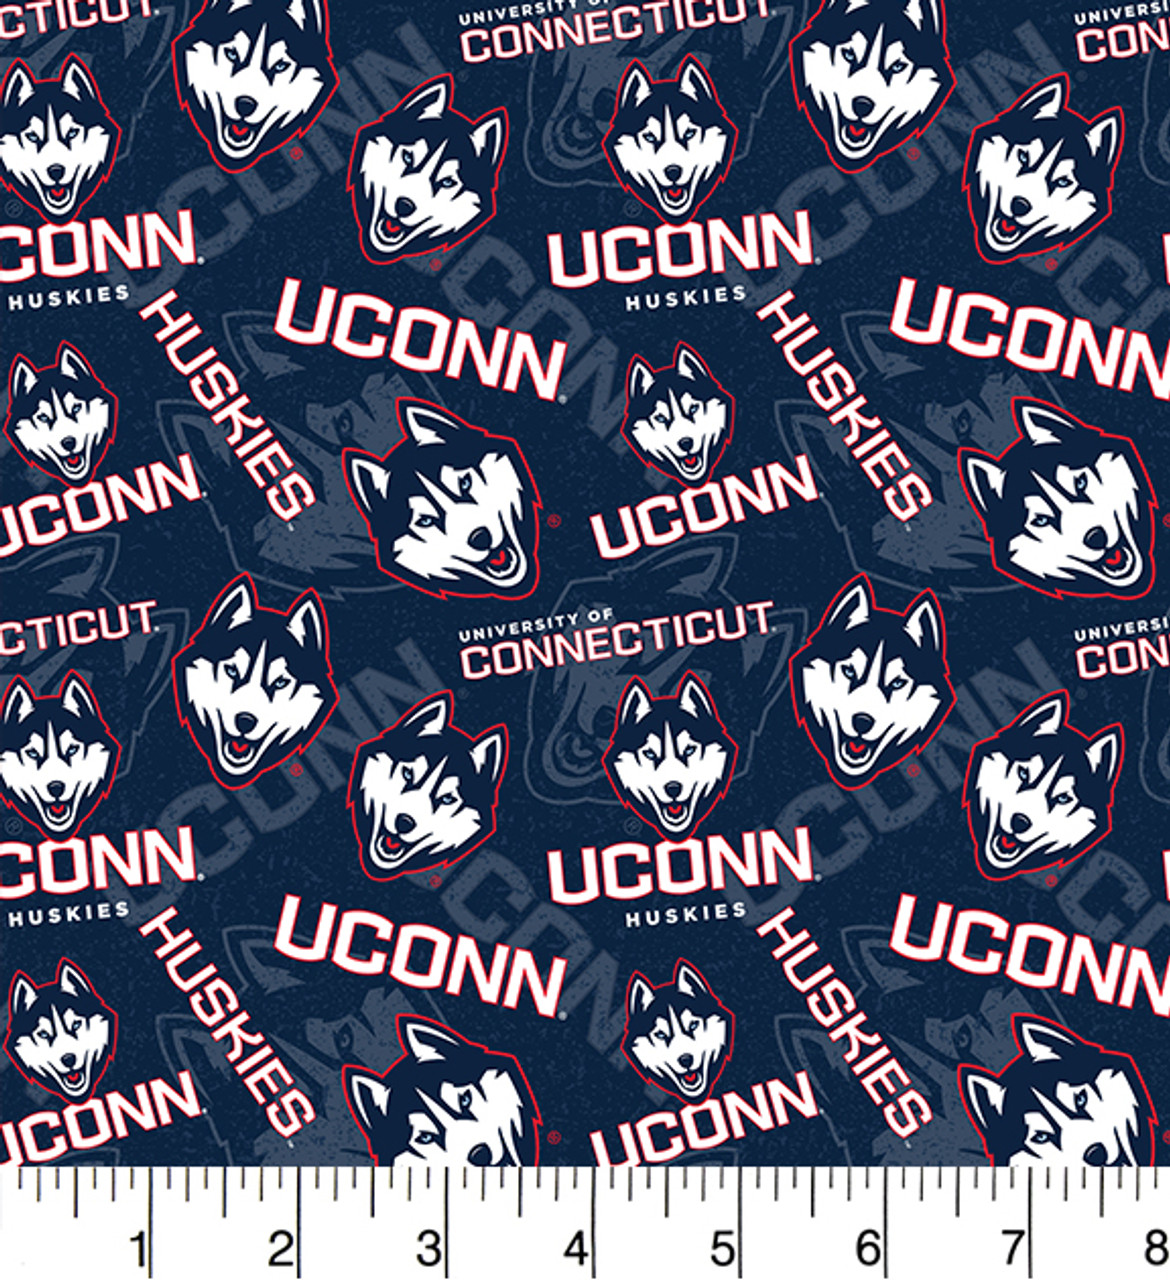  University of Louisville Cotton Fabric with New Tone ON Tone  Design Newest Pattern : Arts, Crafts & Sewing